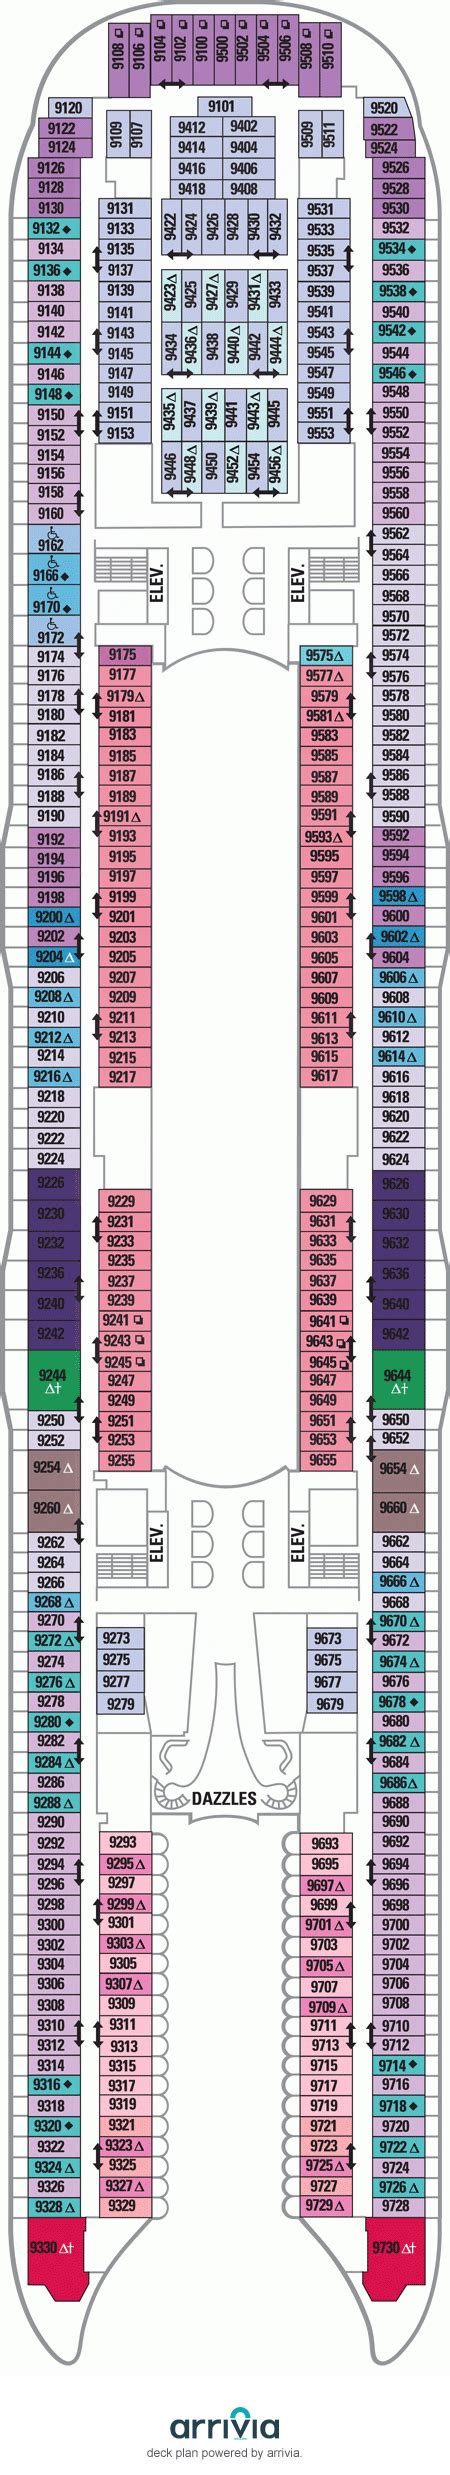 Rollover cabins for detailed diagrams of cabins; Allure of the Seas Deck Plans